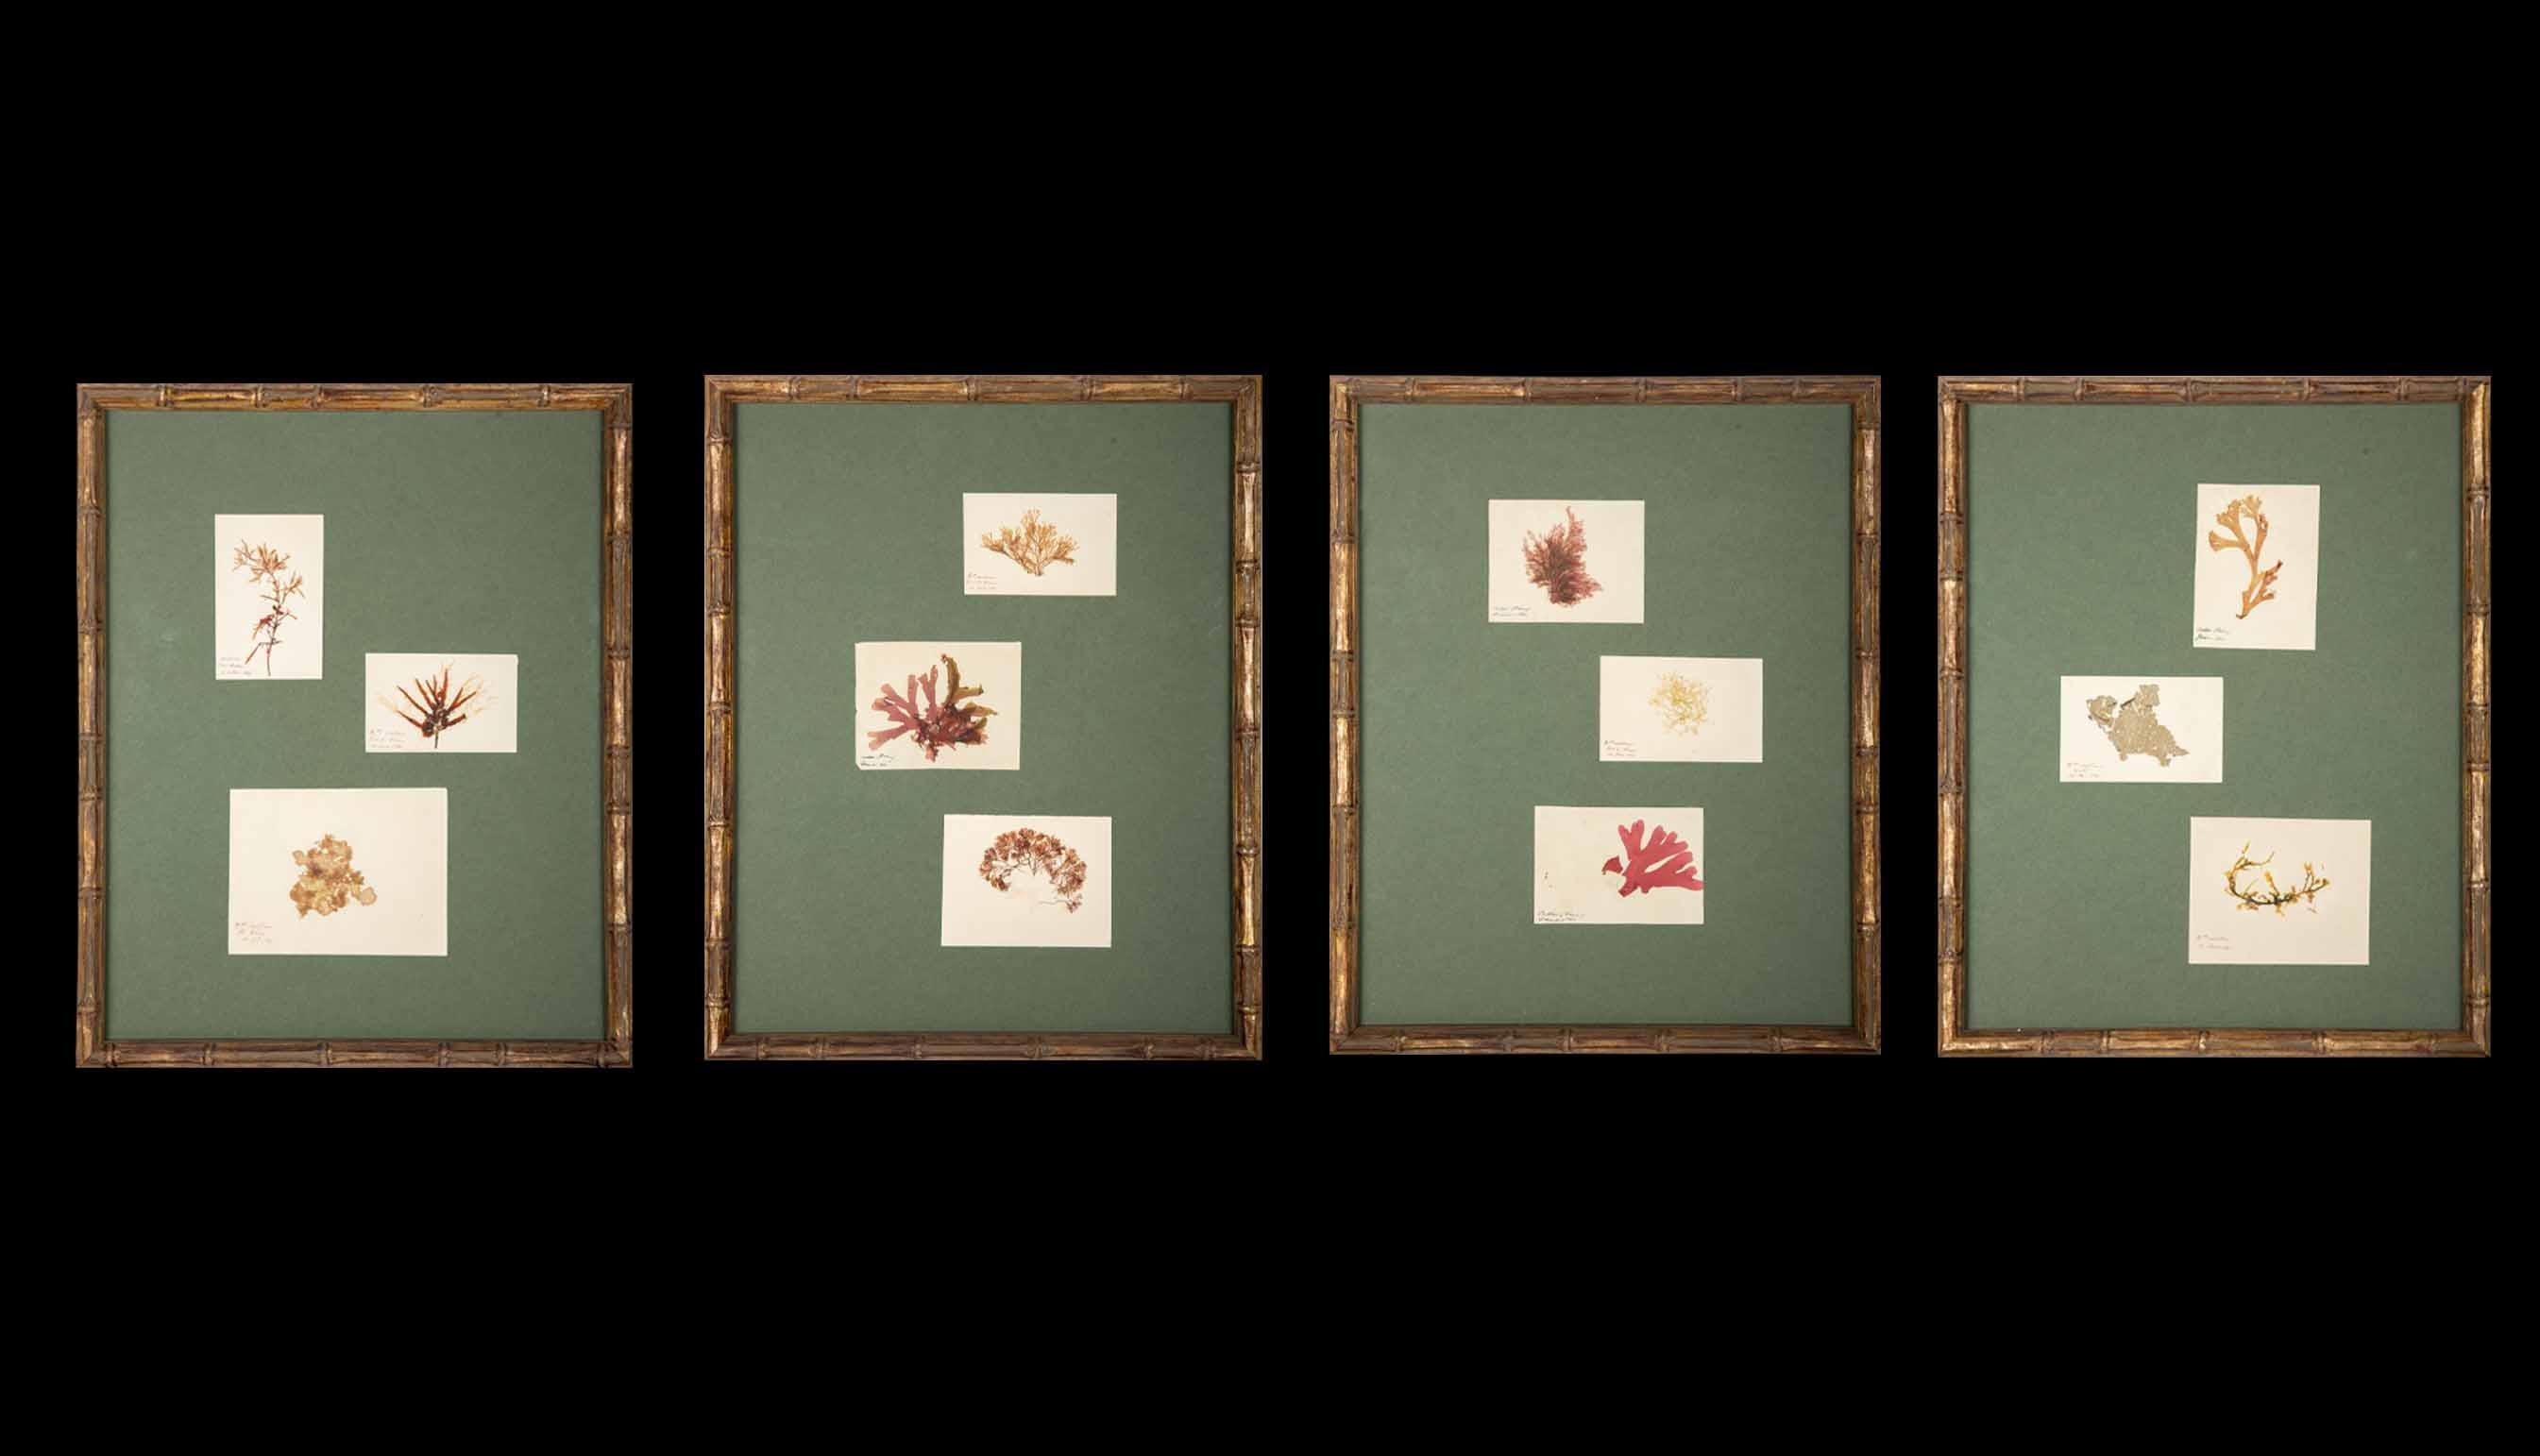 Napoleon III Framed and Pressed French Alguier Specimens from the 19th Century